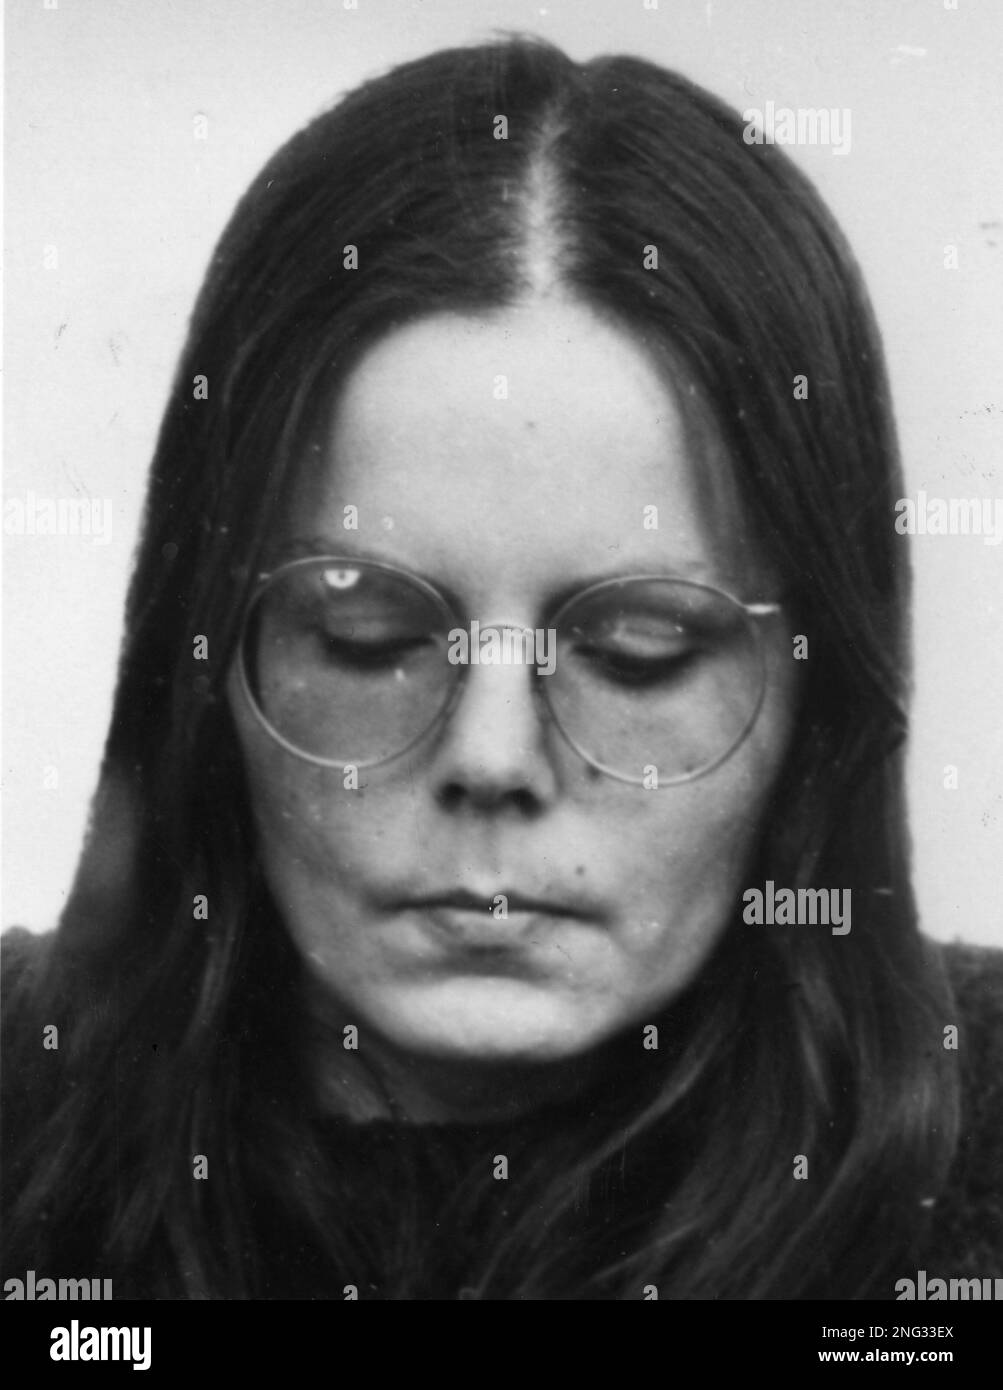 Undated portrait of West German terrorist Eva Sybille Haule-Frimpong. Haule-Frimpong, a member of the RAF (Rote Armee Fraktion - Red Army Faction) was arrested in an ice cream parlour in Ruesselsheim near Frankfurt am Main, West Germany, August 2, 1986. (AP Photo) Stock Photo